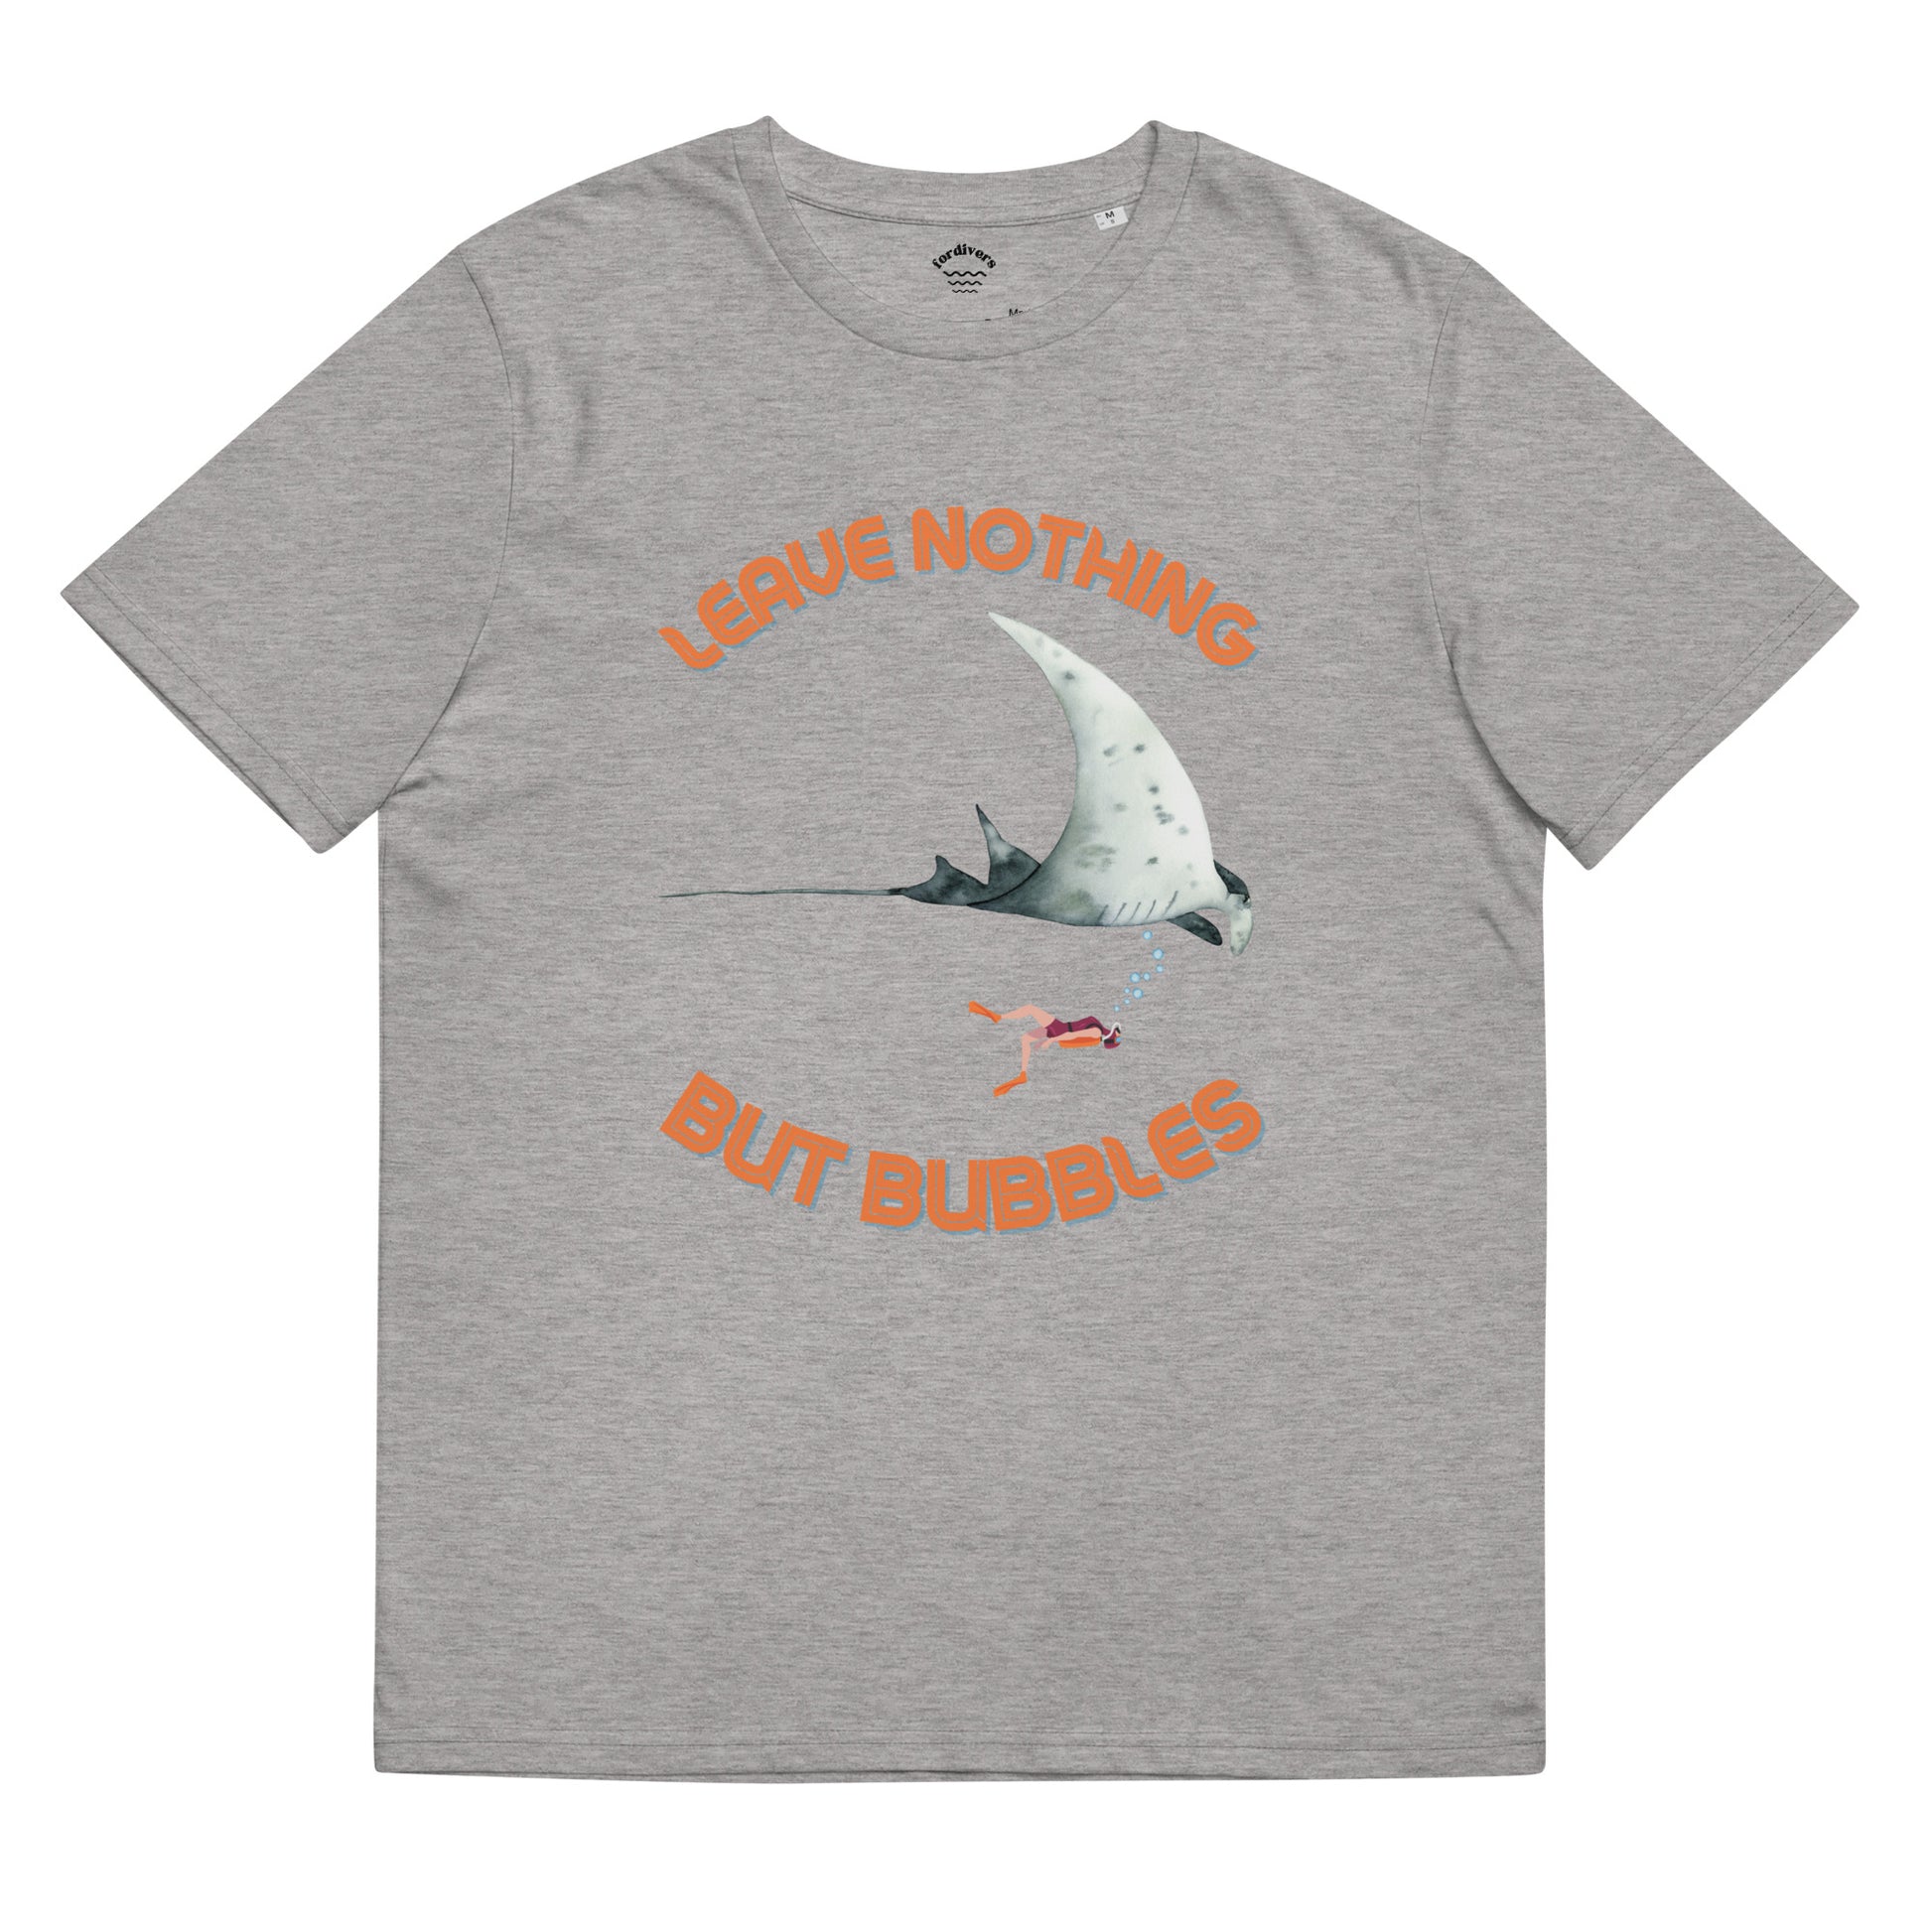 leave nothing but bubbles t-shirt